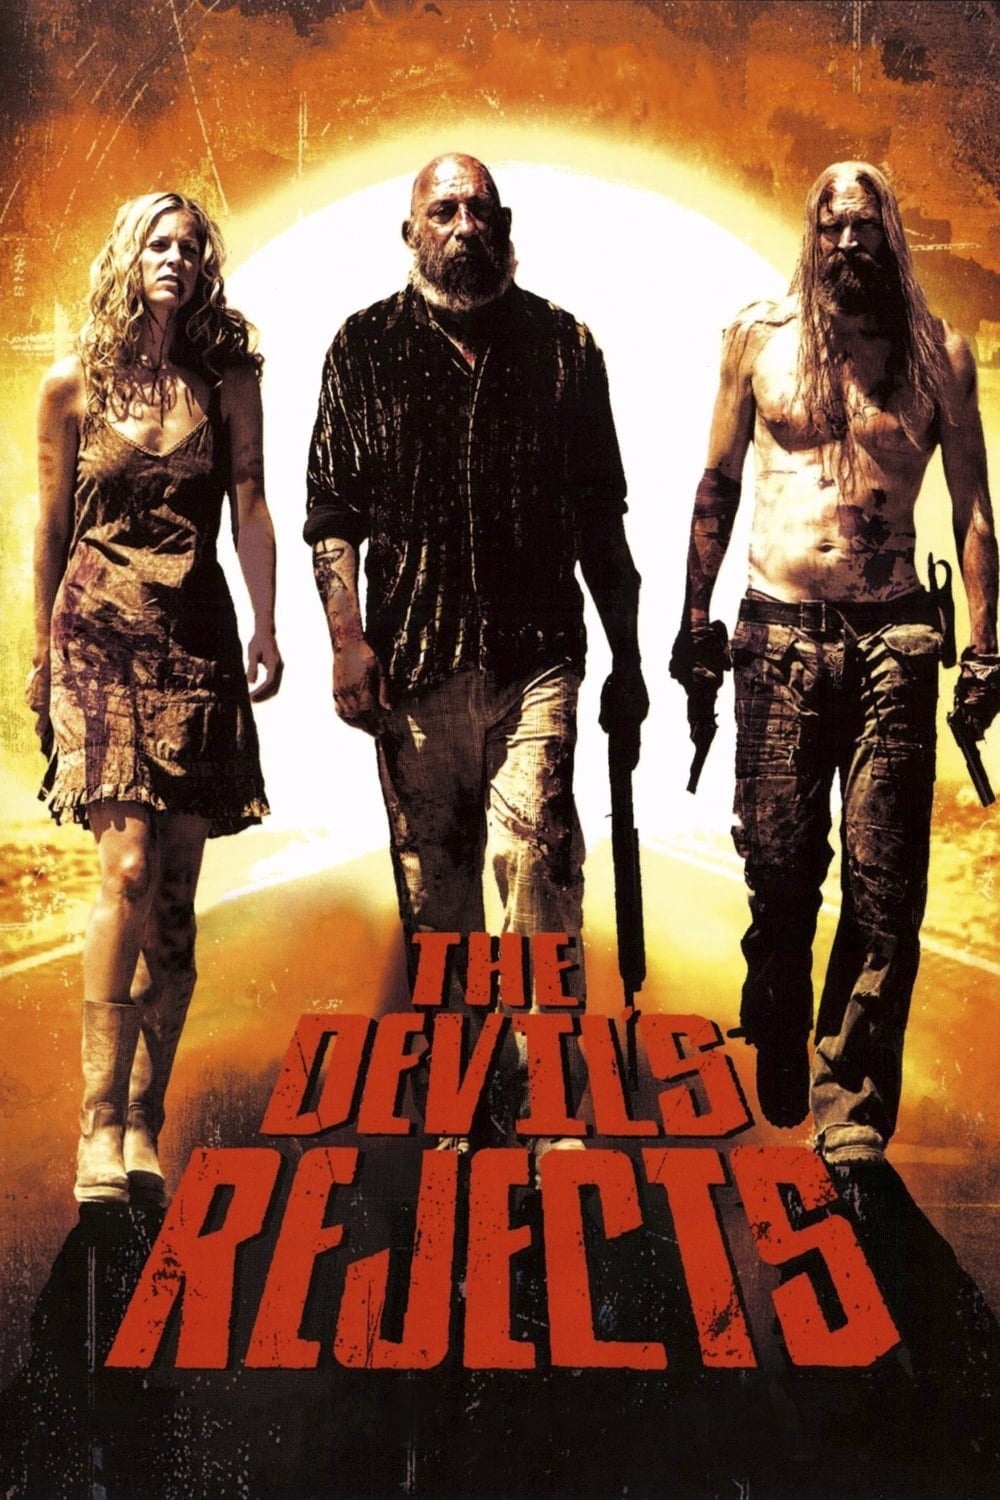 The Devils Rejects (2005) Dual Audio Hindi ORG 1080p 720p 480p BluRay Download